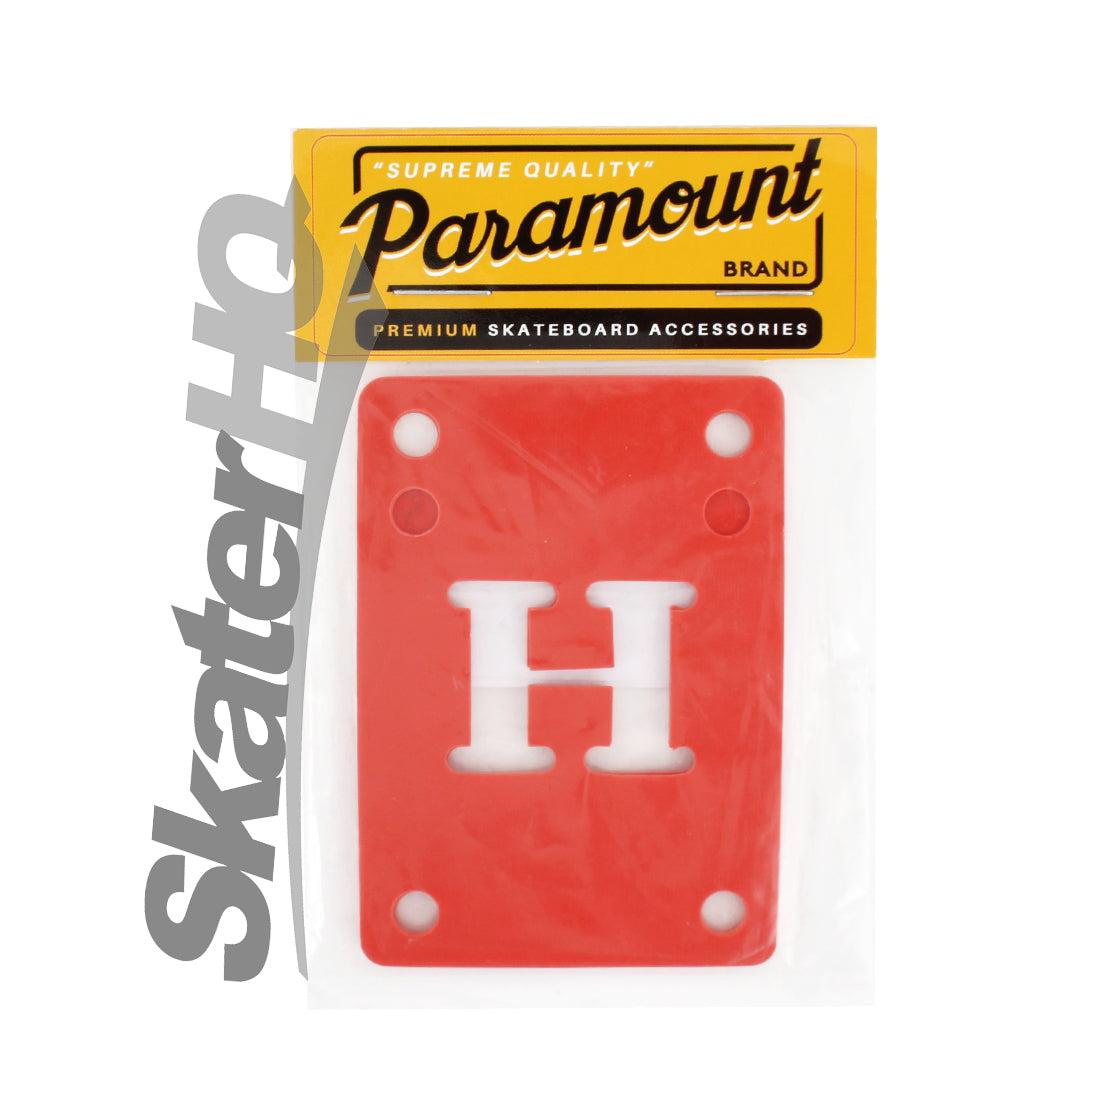 Paramount 1mm Soft Riser Pads - Red Skateboard Hardware and Parts